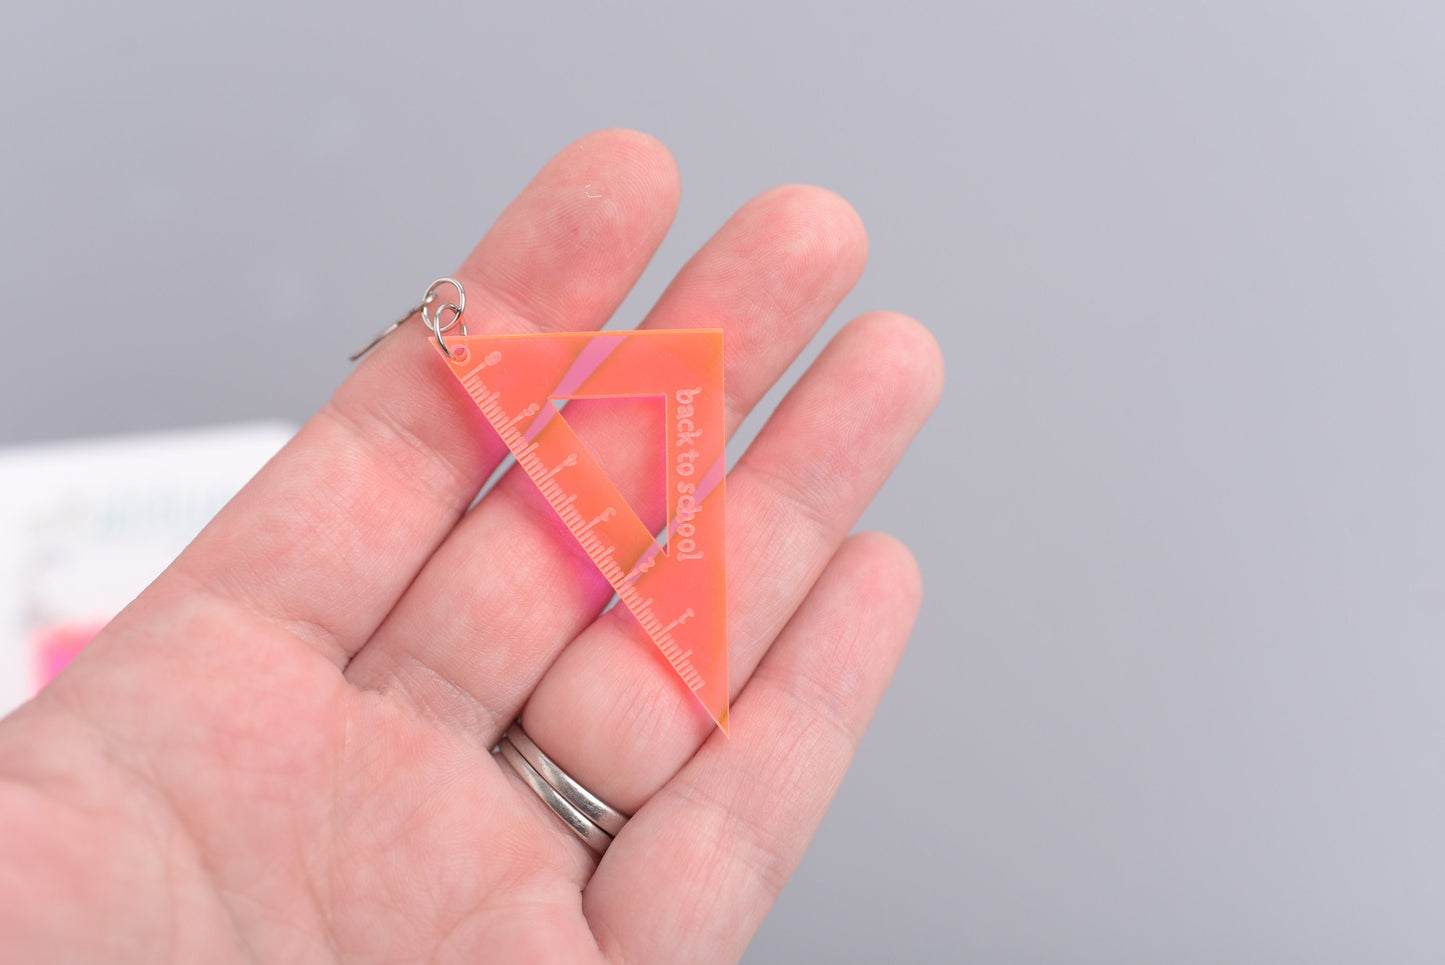 Geometry Ruler Earrings with Titanium Ear Wires- Neon Pink or Yellow